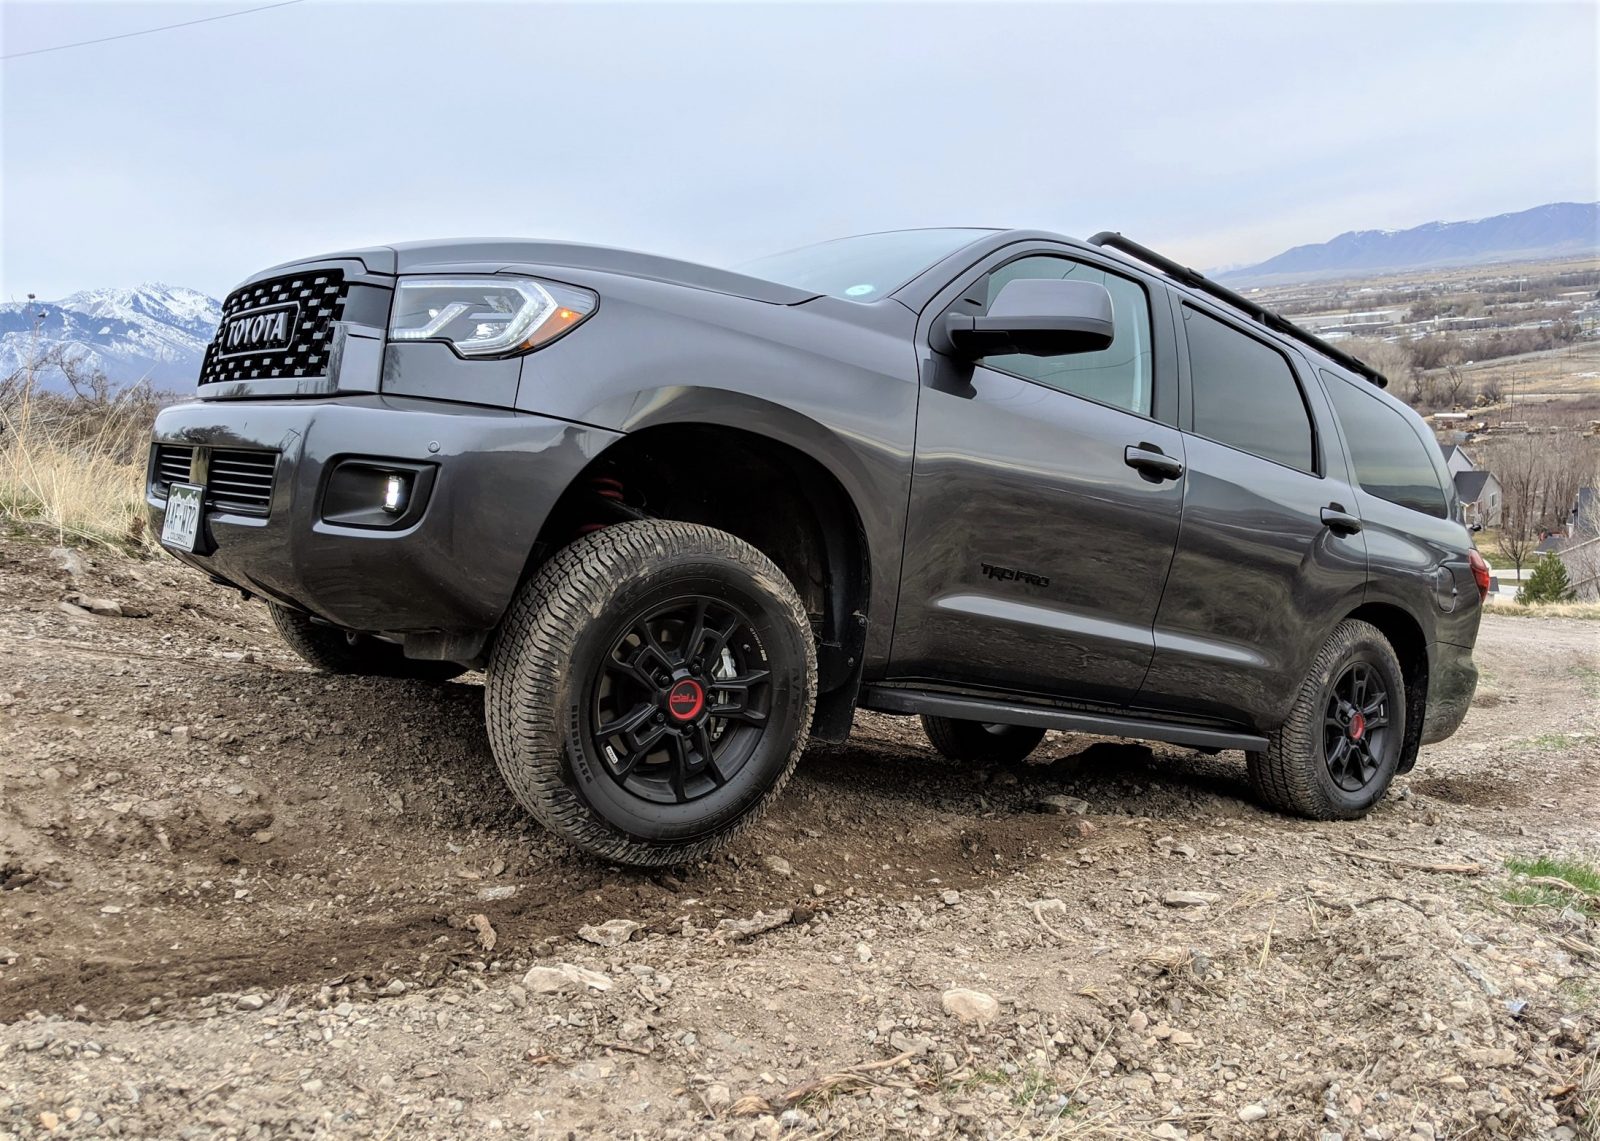 2020 Toyota Sequoia TRD Pro OffRoad Review By Matt Barnes » LATEST